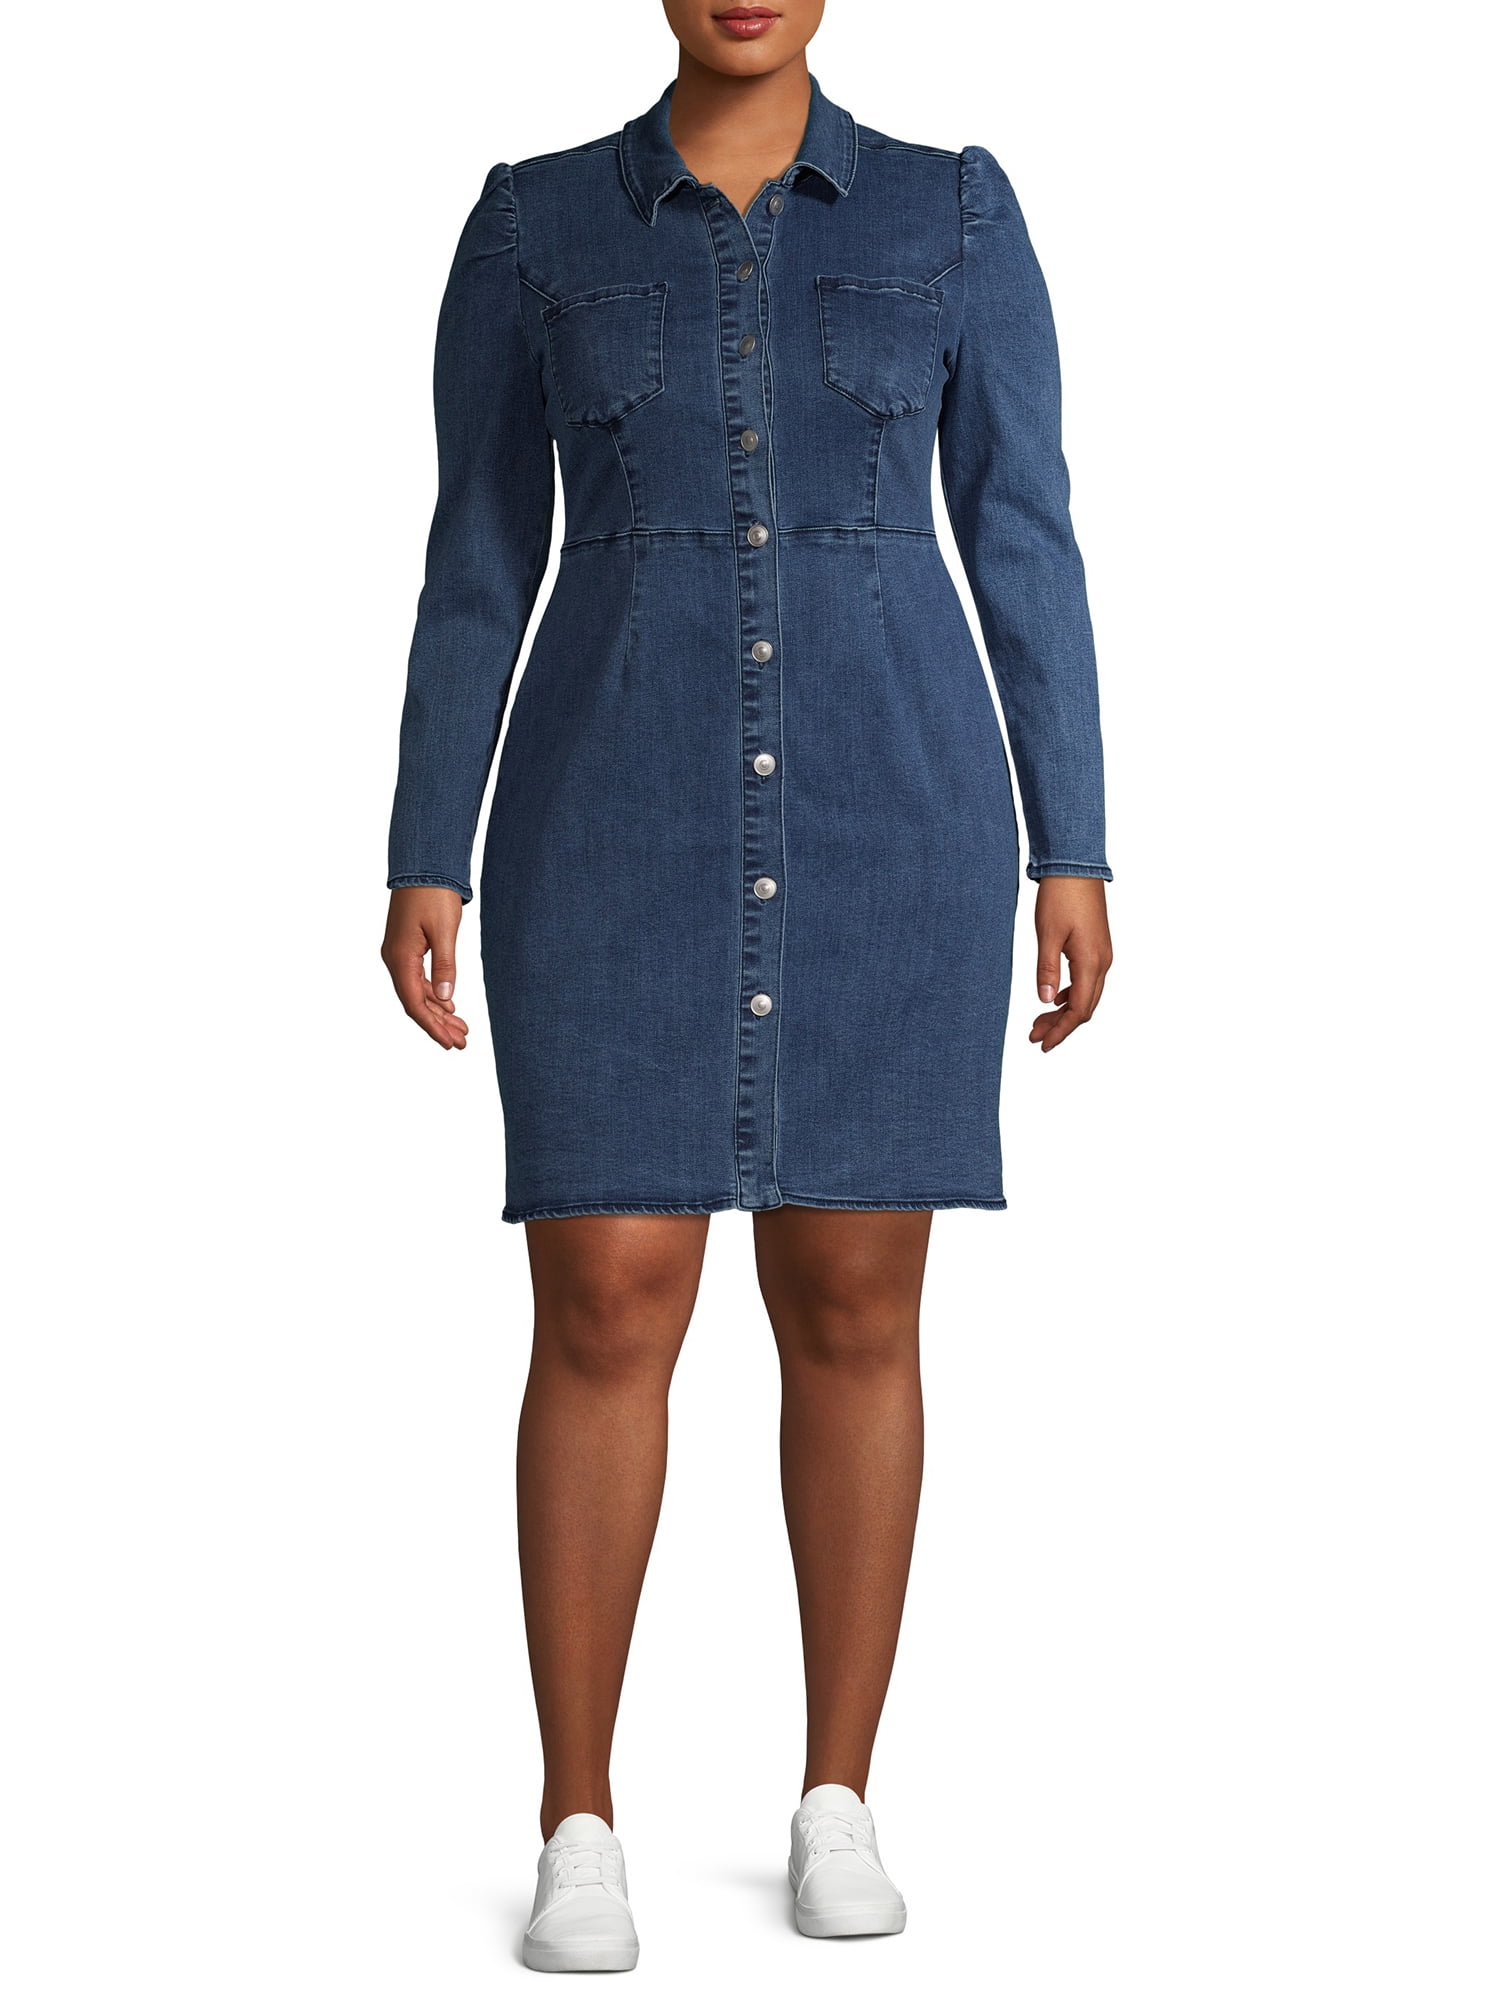 denim dress with button front